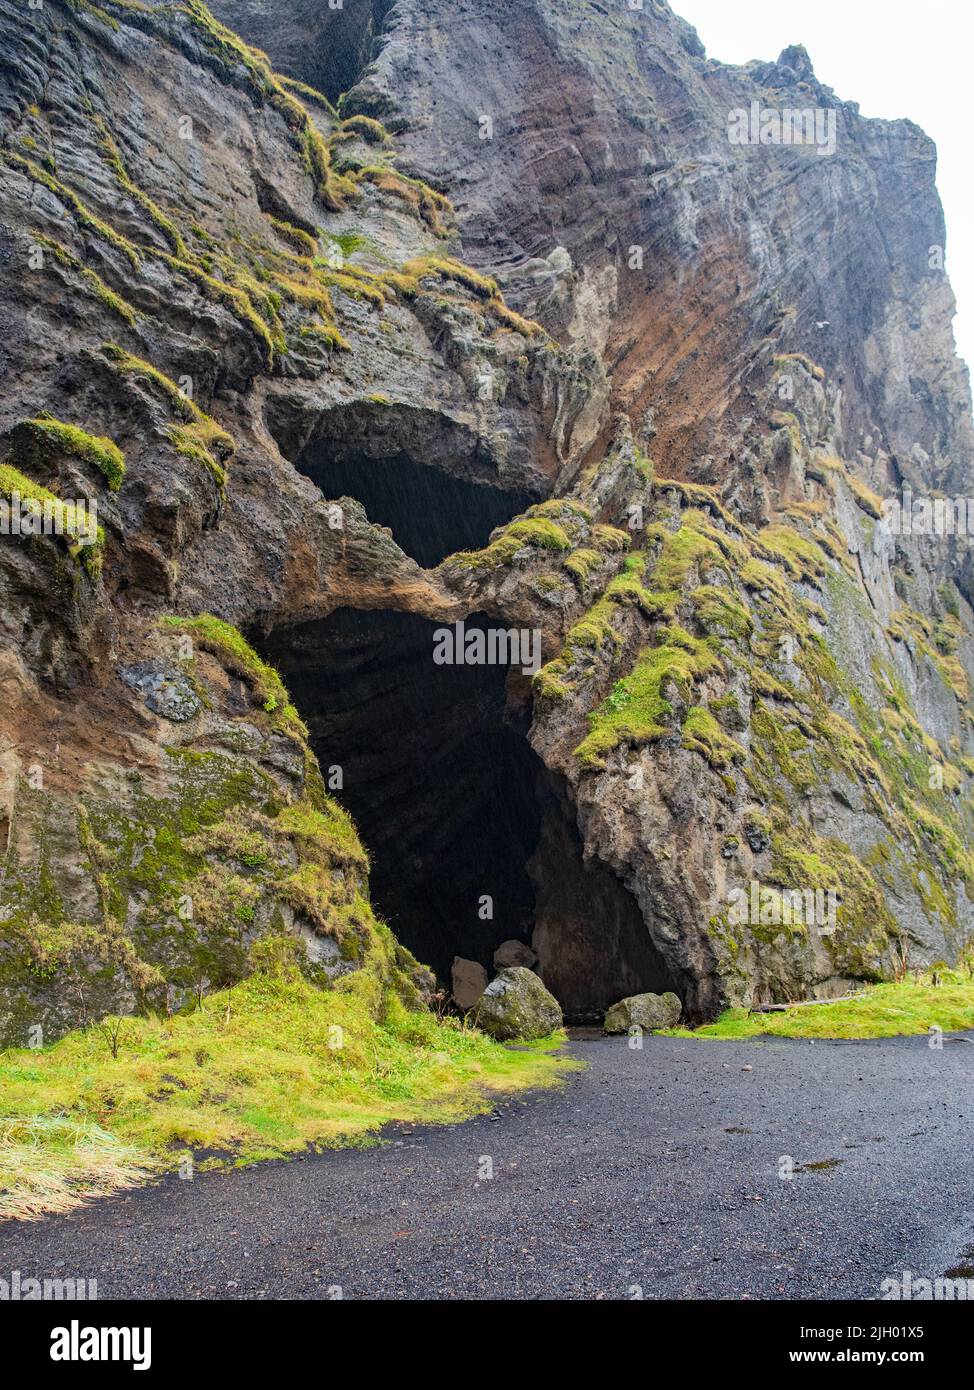 Named after Hjörleifur, the famous settler of Iceland’s History, the cave is located on the south coast of Iceland. With the panoramic view of hills, Stock Photo